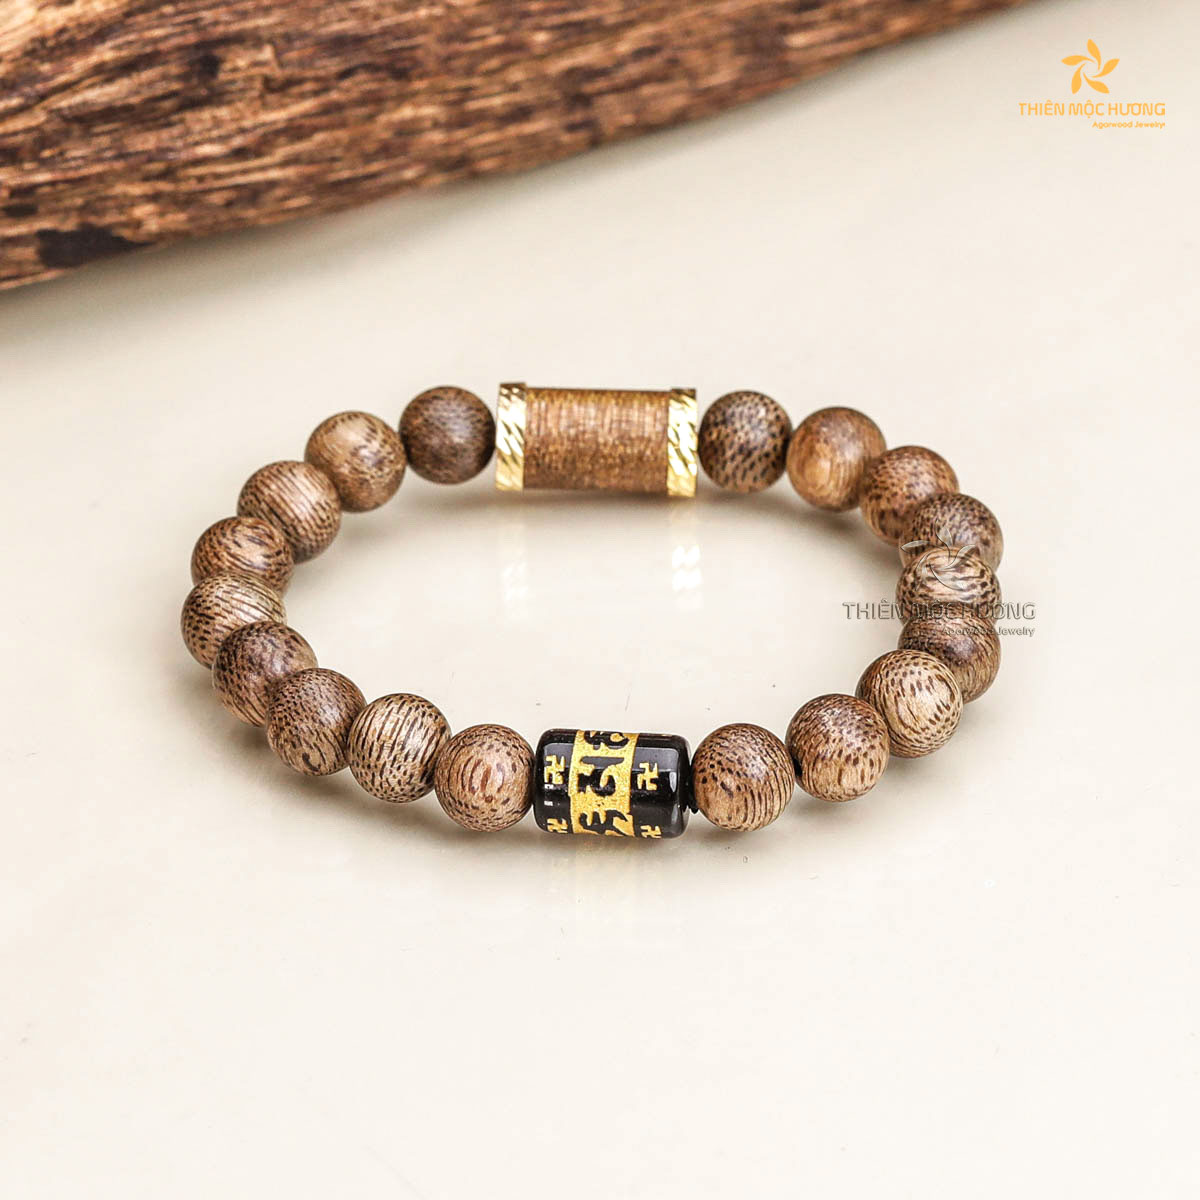 Natural Agarwood Bracelet with captivating colors and organic textures